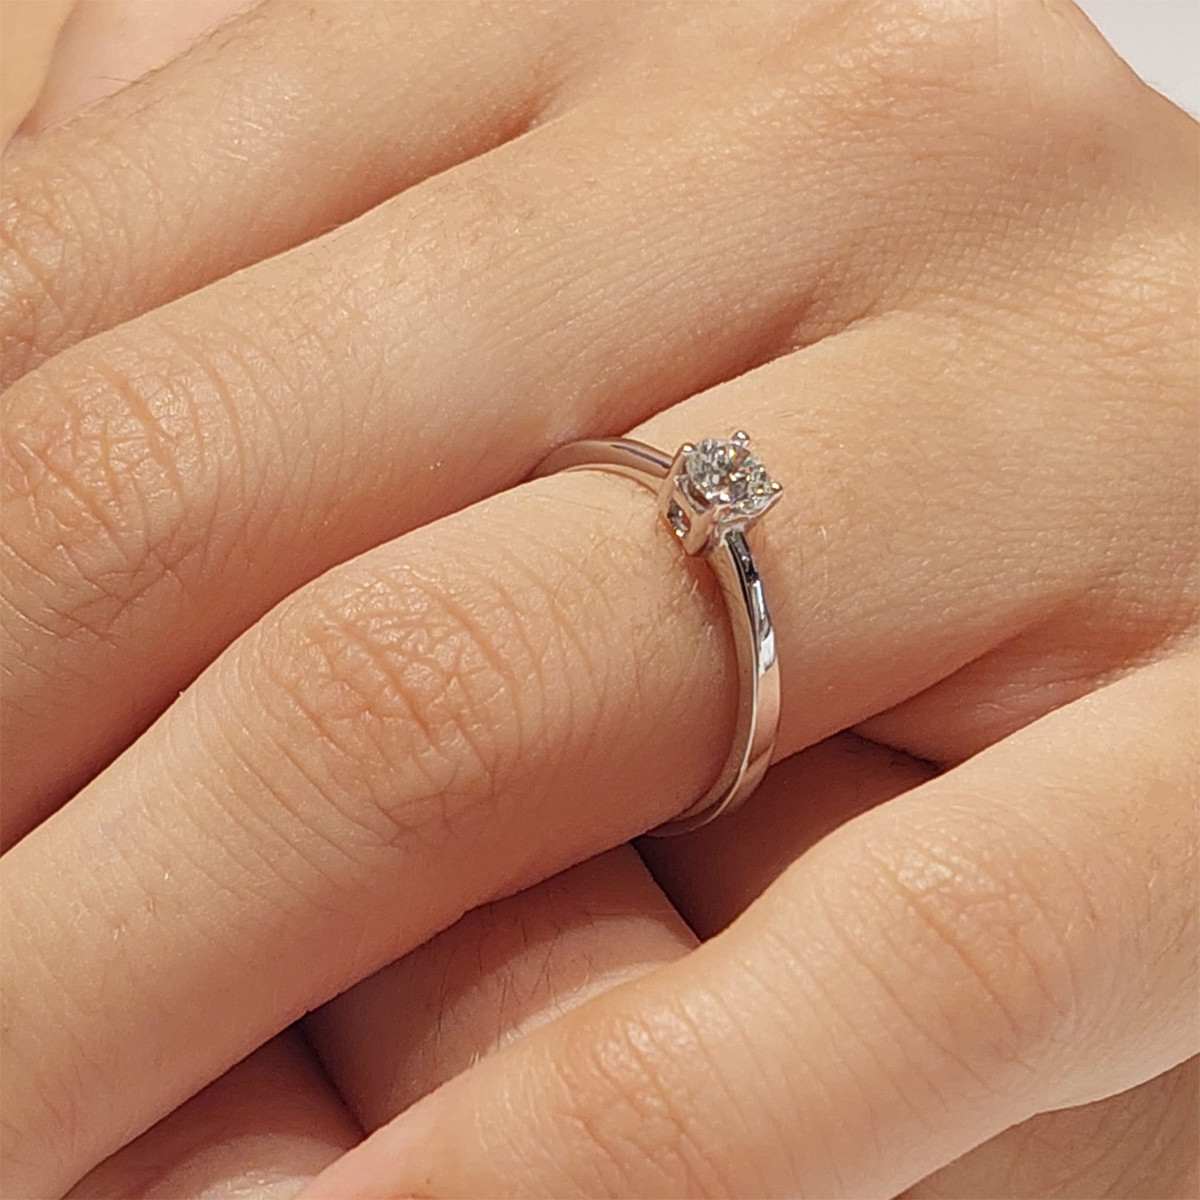 SOLITAIRE RING WHITE GOLD WITH DIAMOND